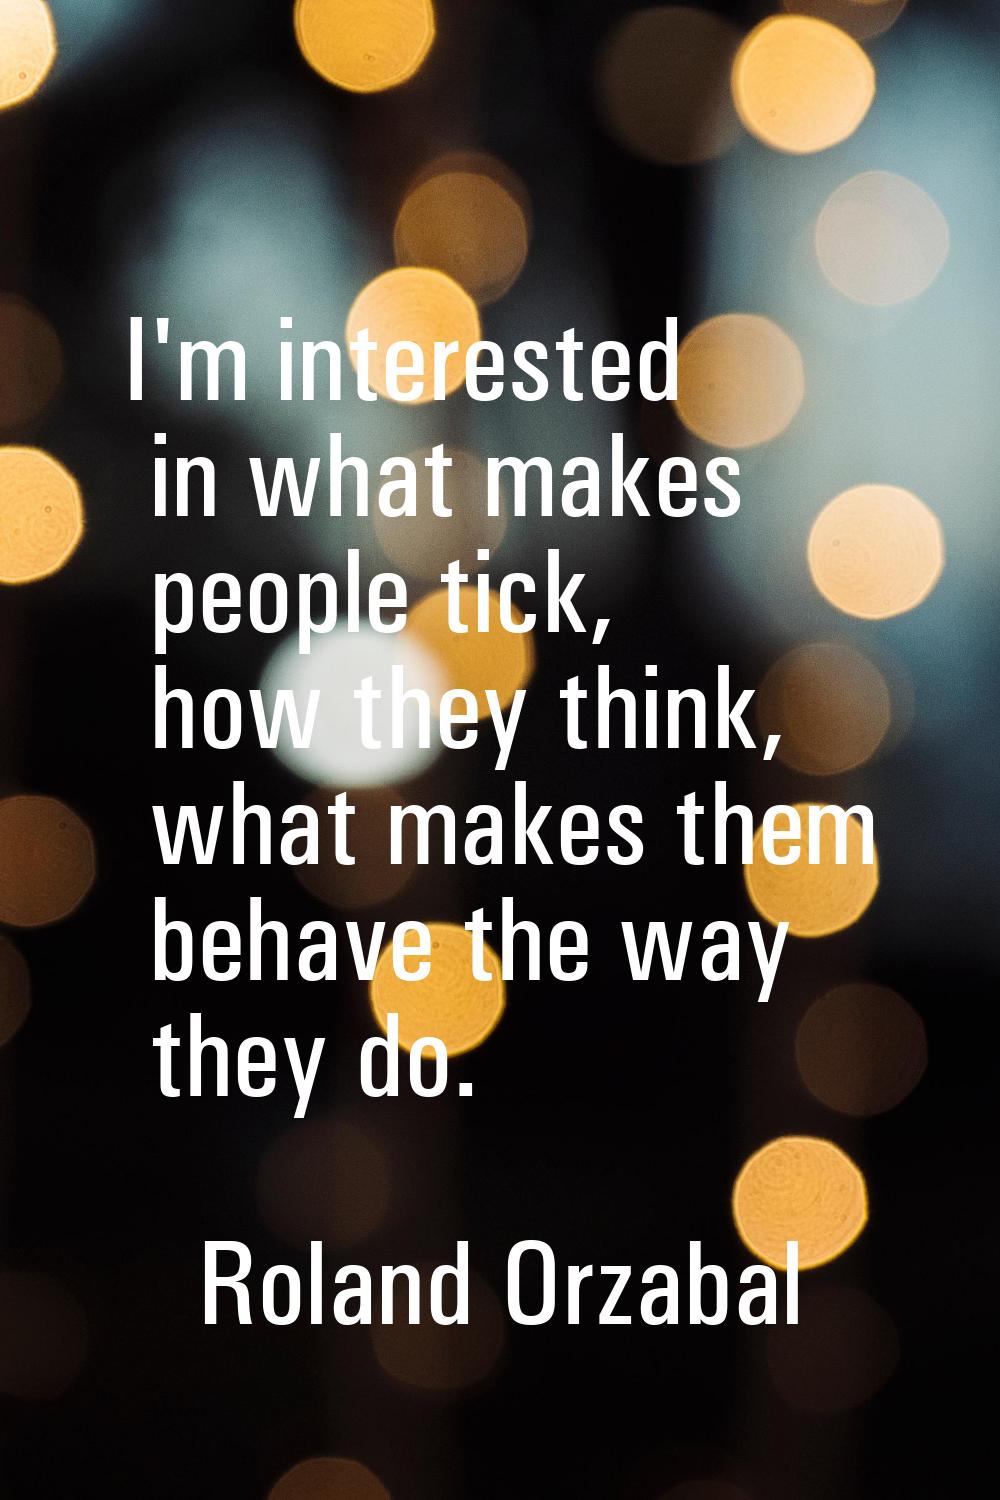 I'm interested in what makes people tick, how they think, what makes them behave the way they do.